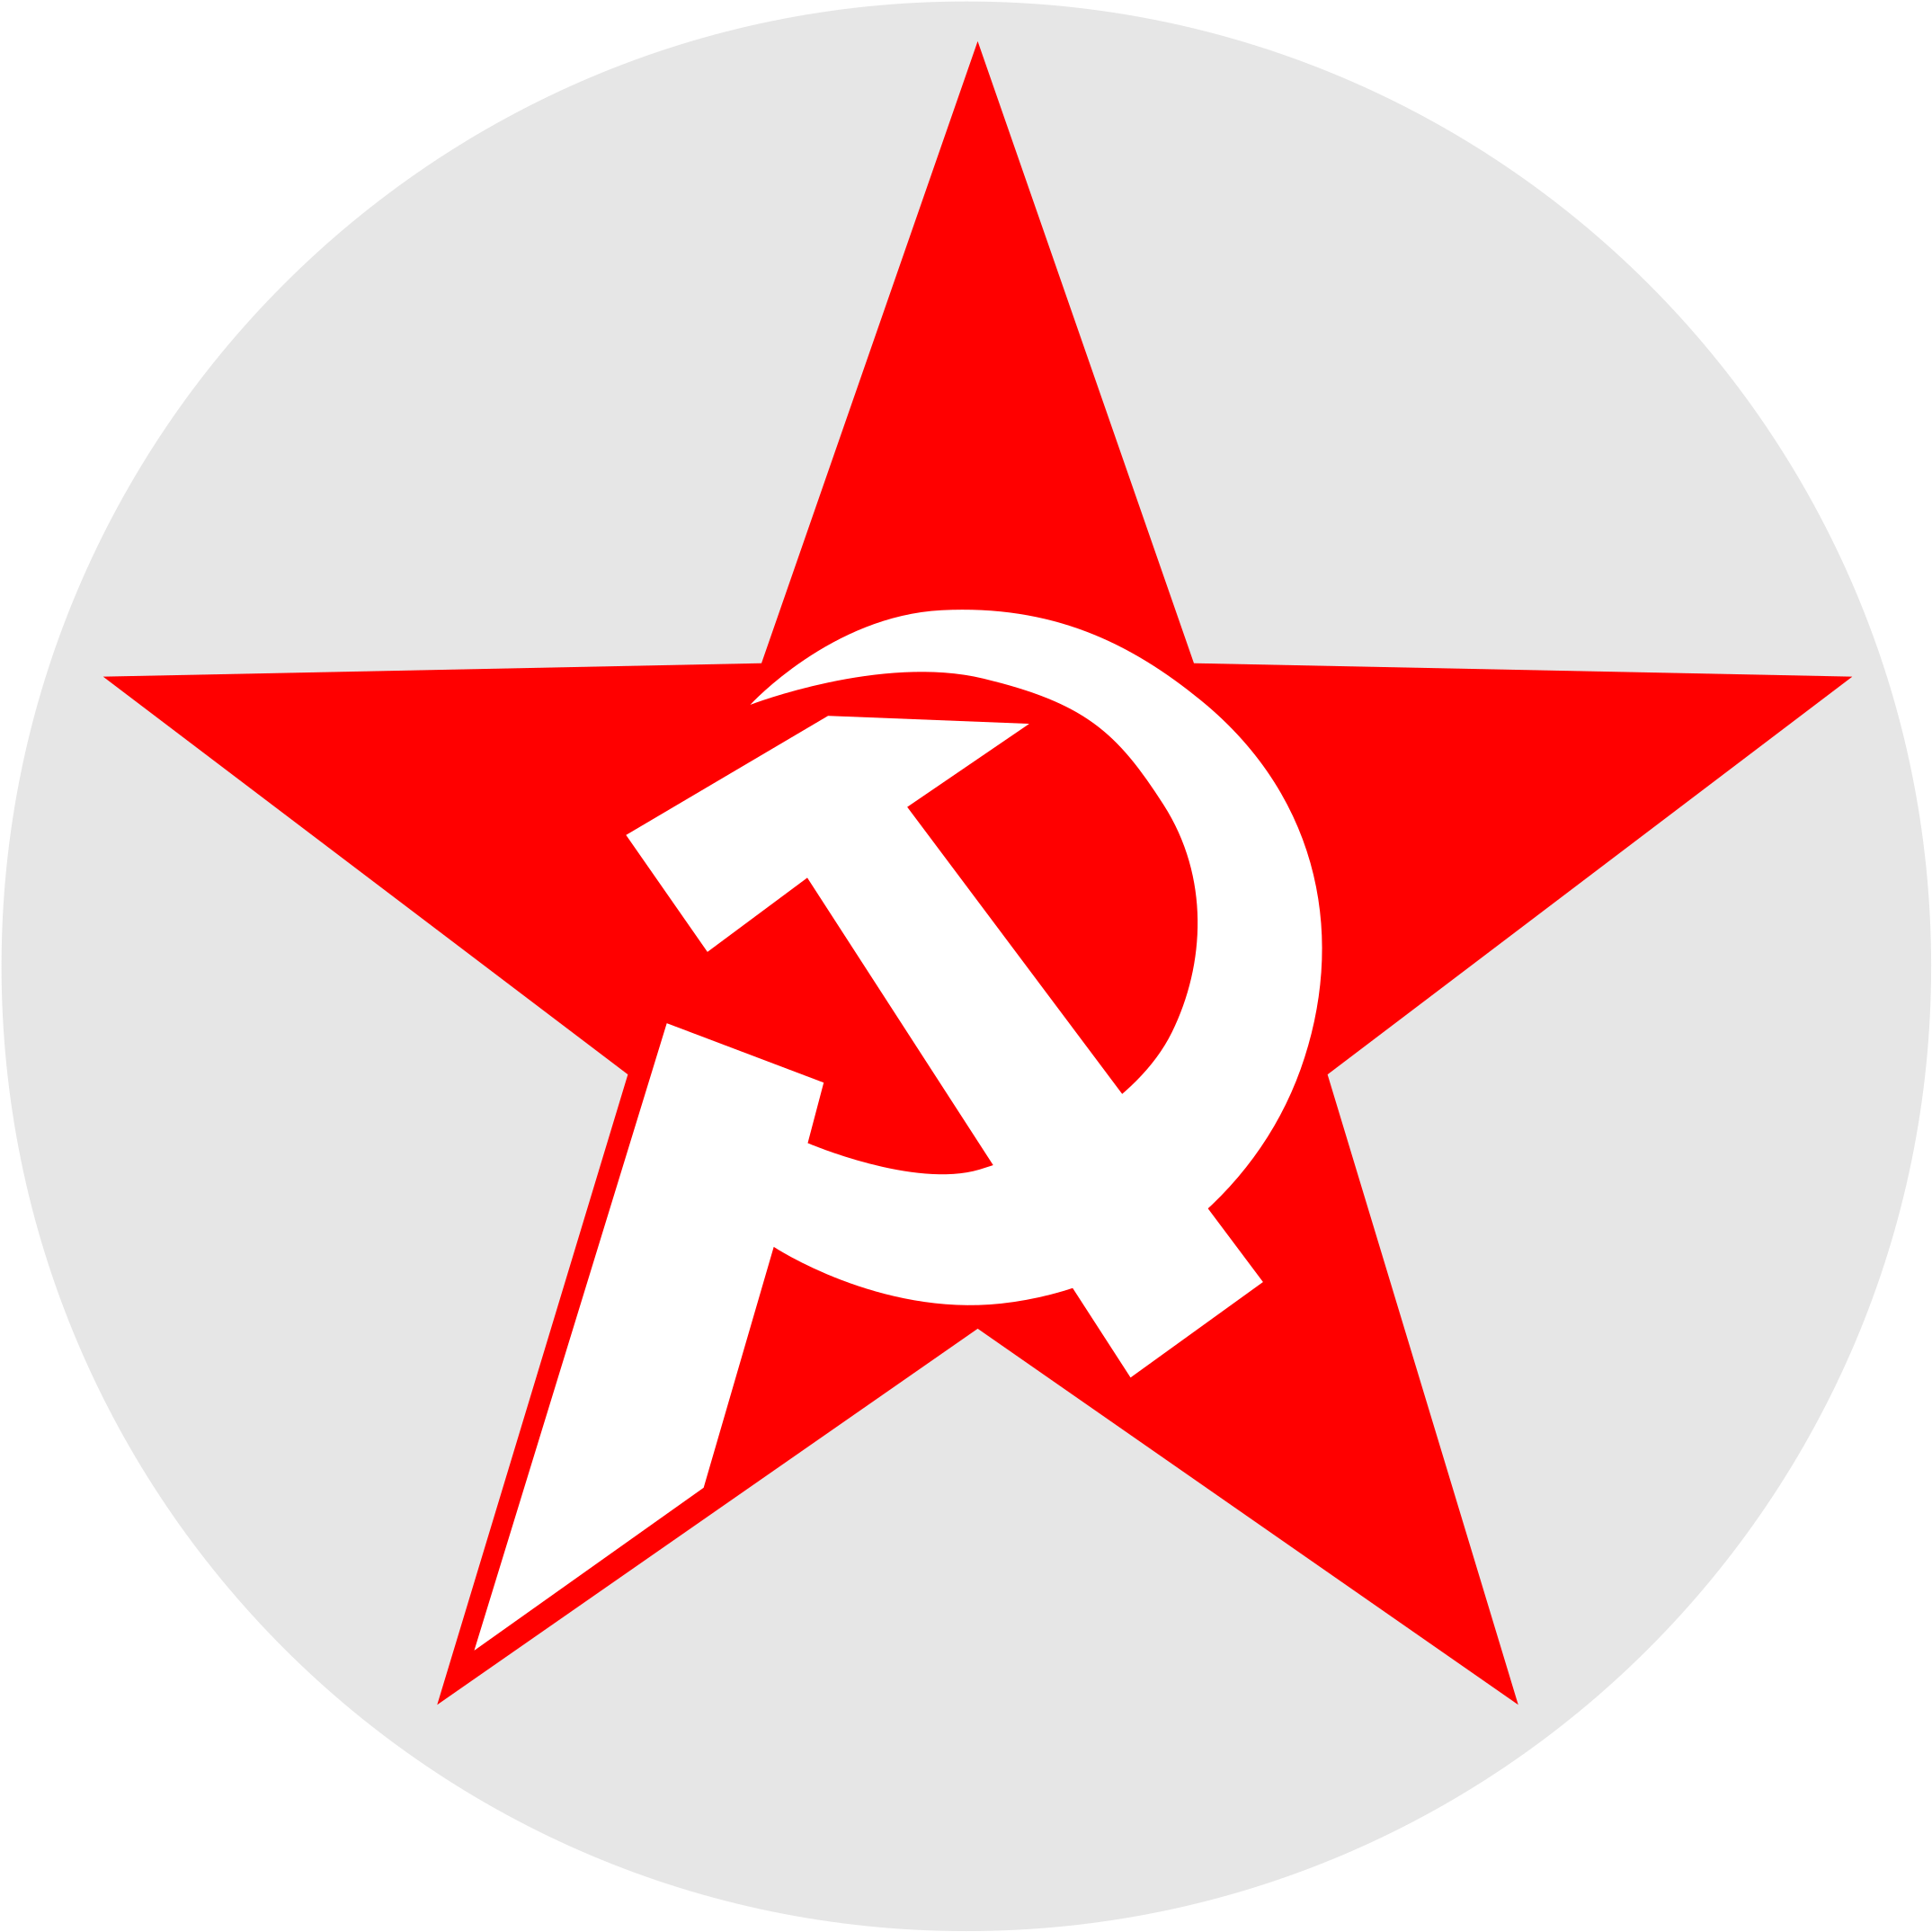 And Sickle In Star And Circle - Hammer And Sickle .jpg (2400x2400)